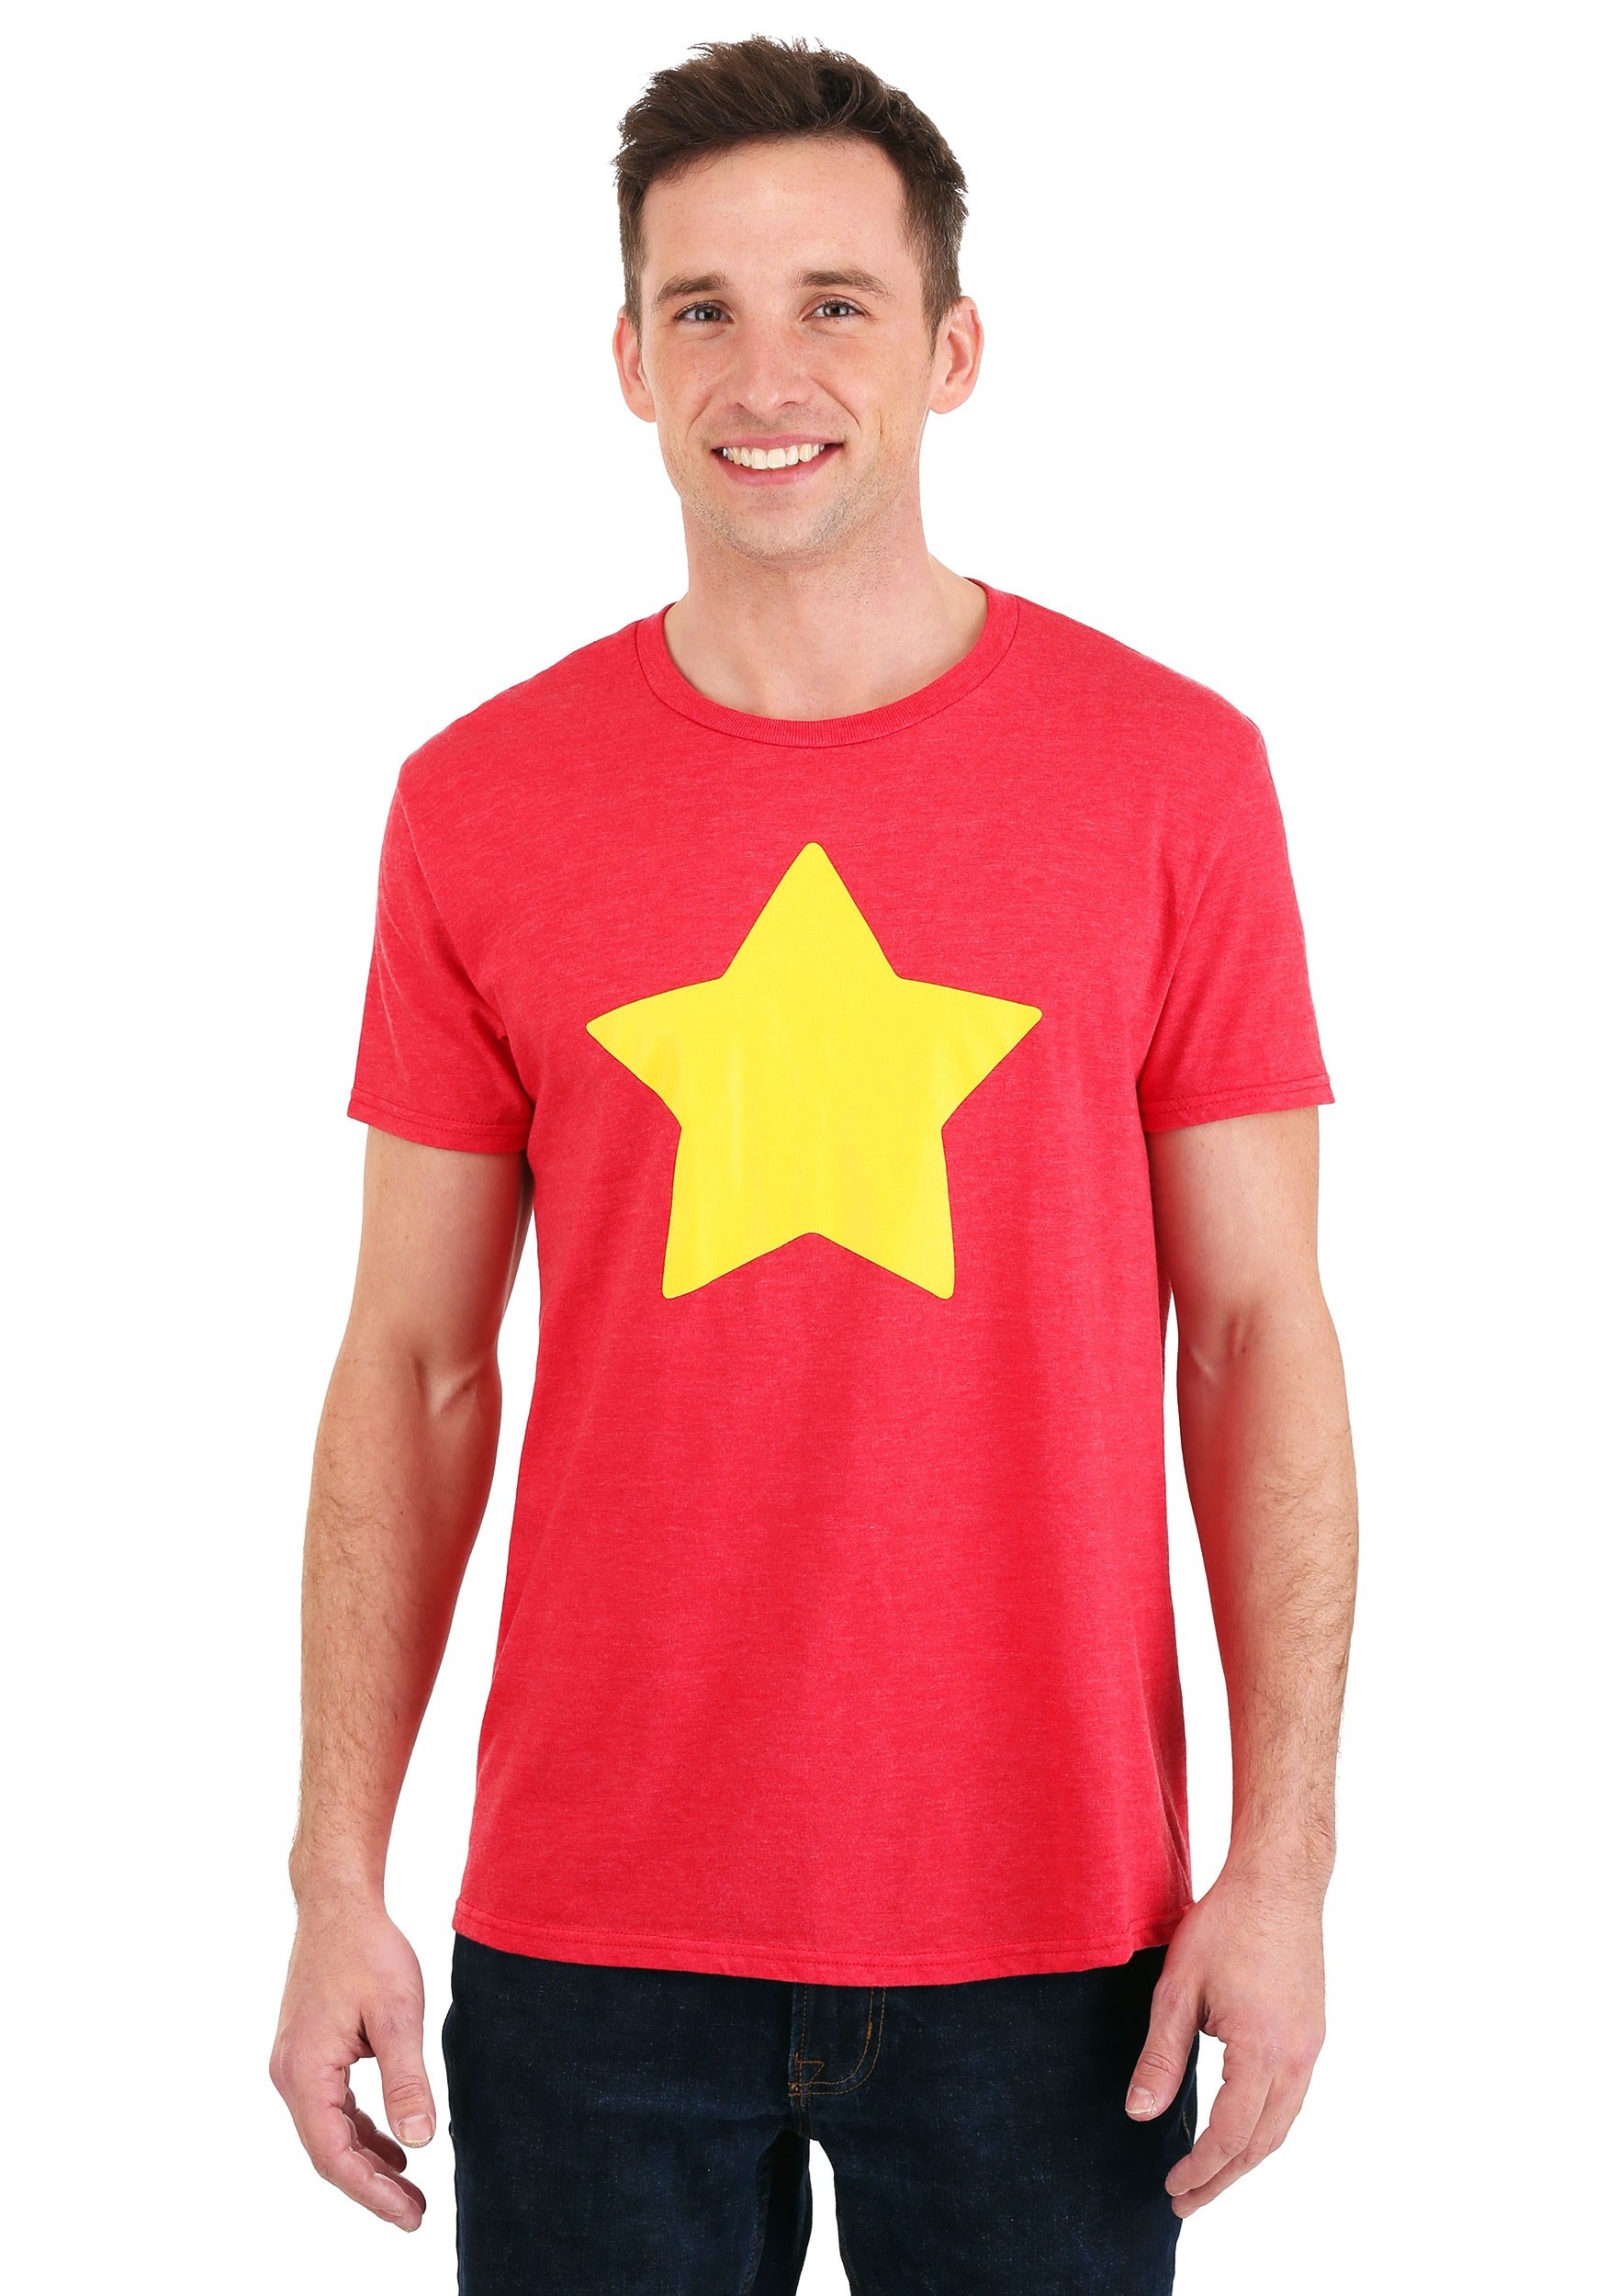 Do Or Do Nut Youth T-Shirt Steven Universe 